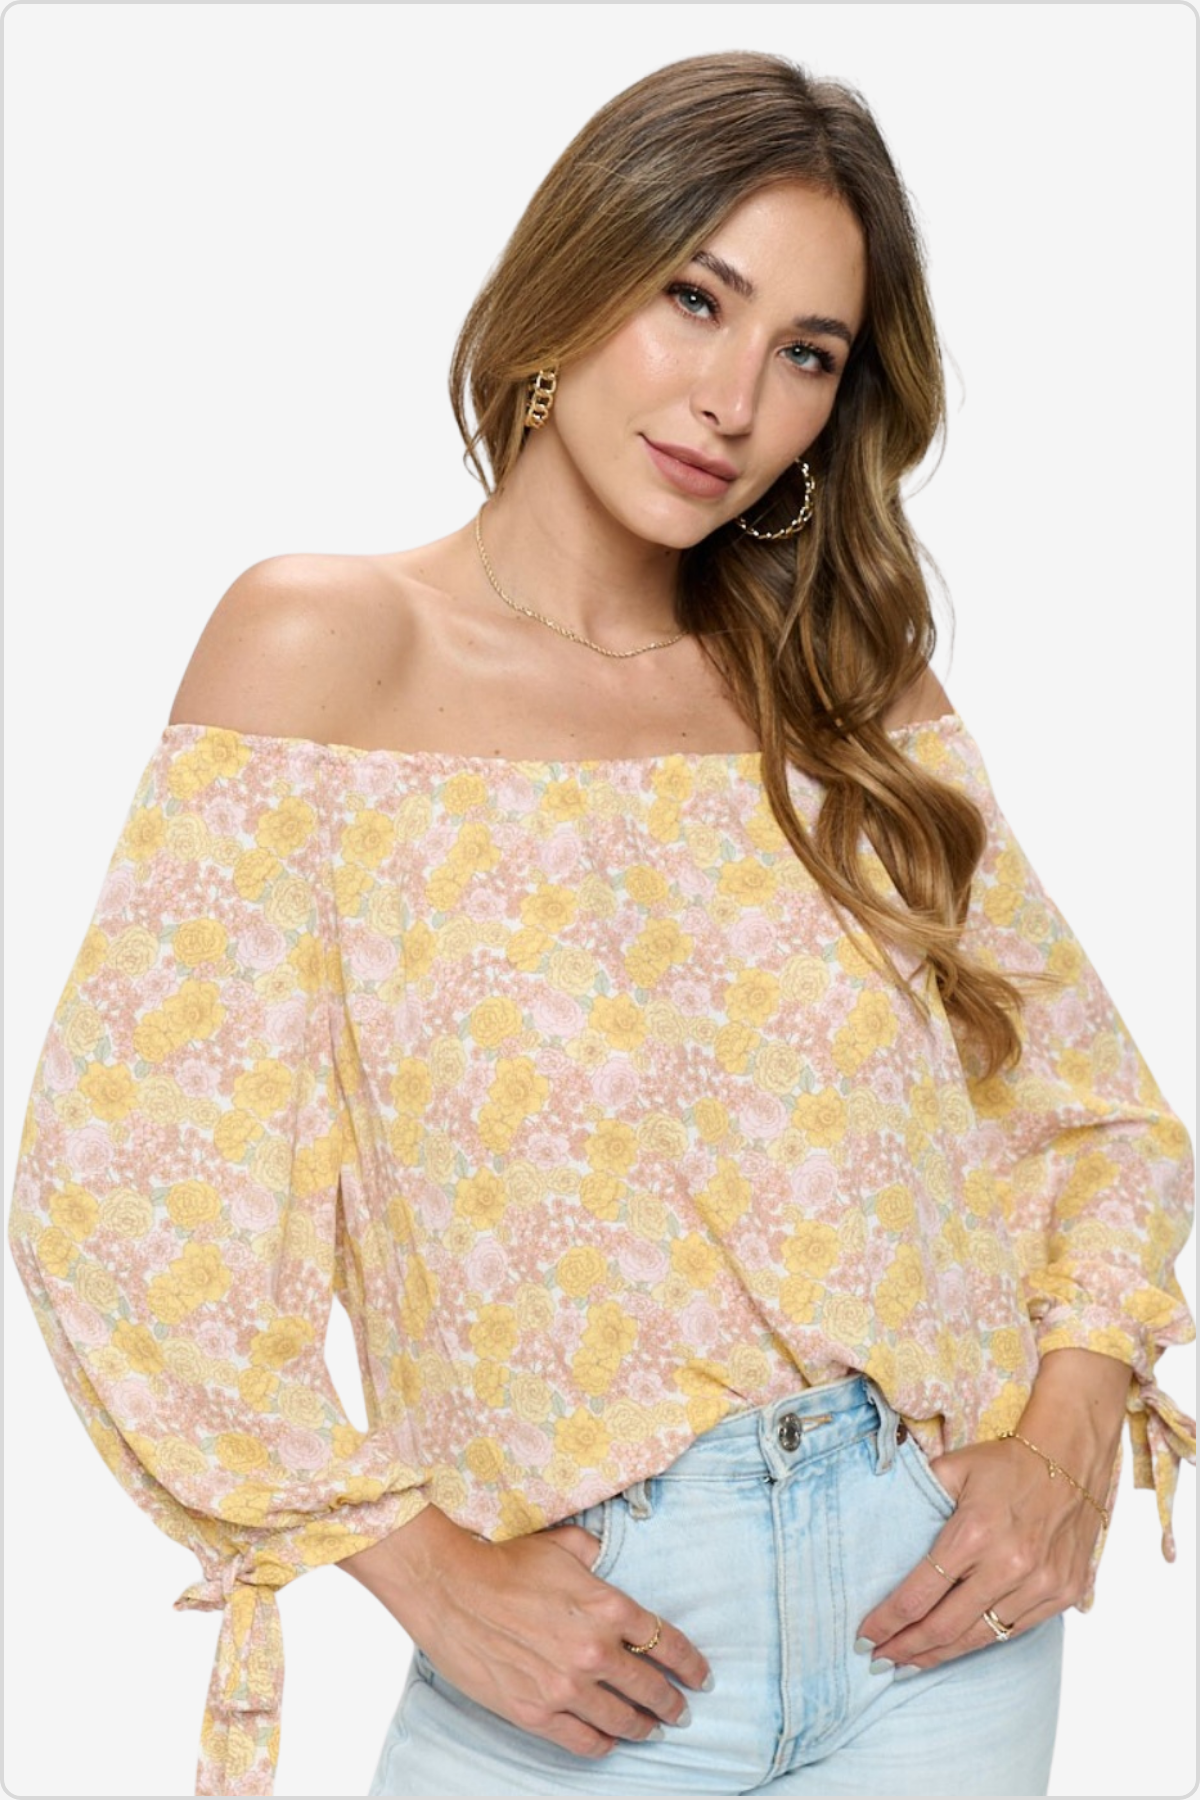 Elegant off-shoulder blouse with yellow and pink floral pattern, featuring tie-up sleeves and a relaxed fit, ideal for spring and summer fashion.